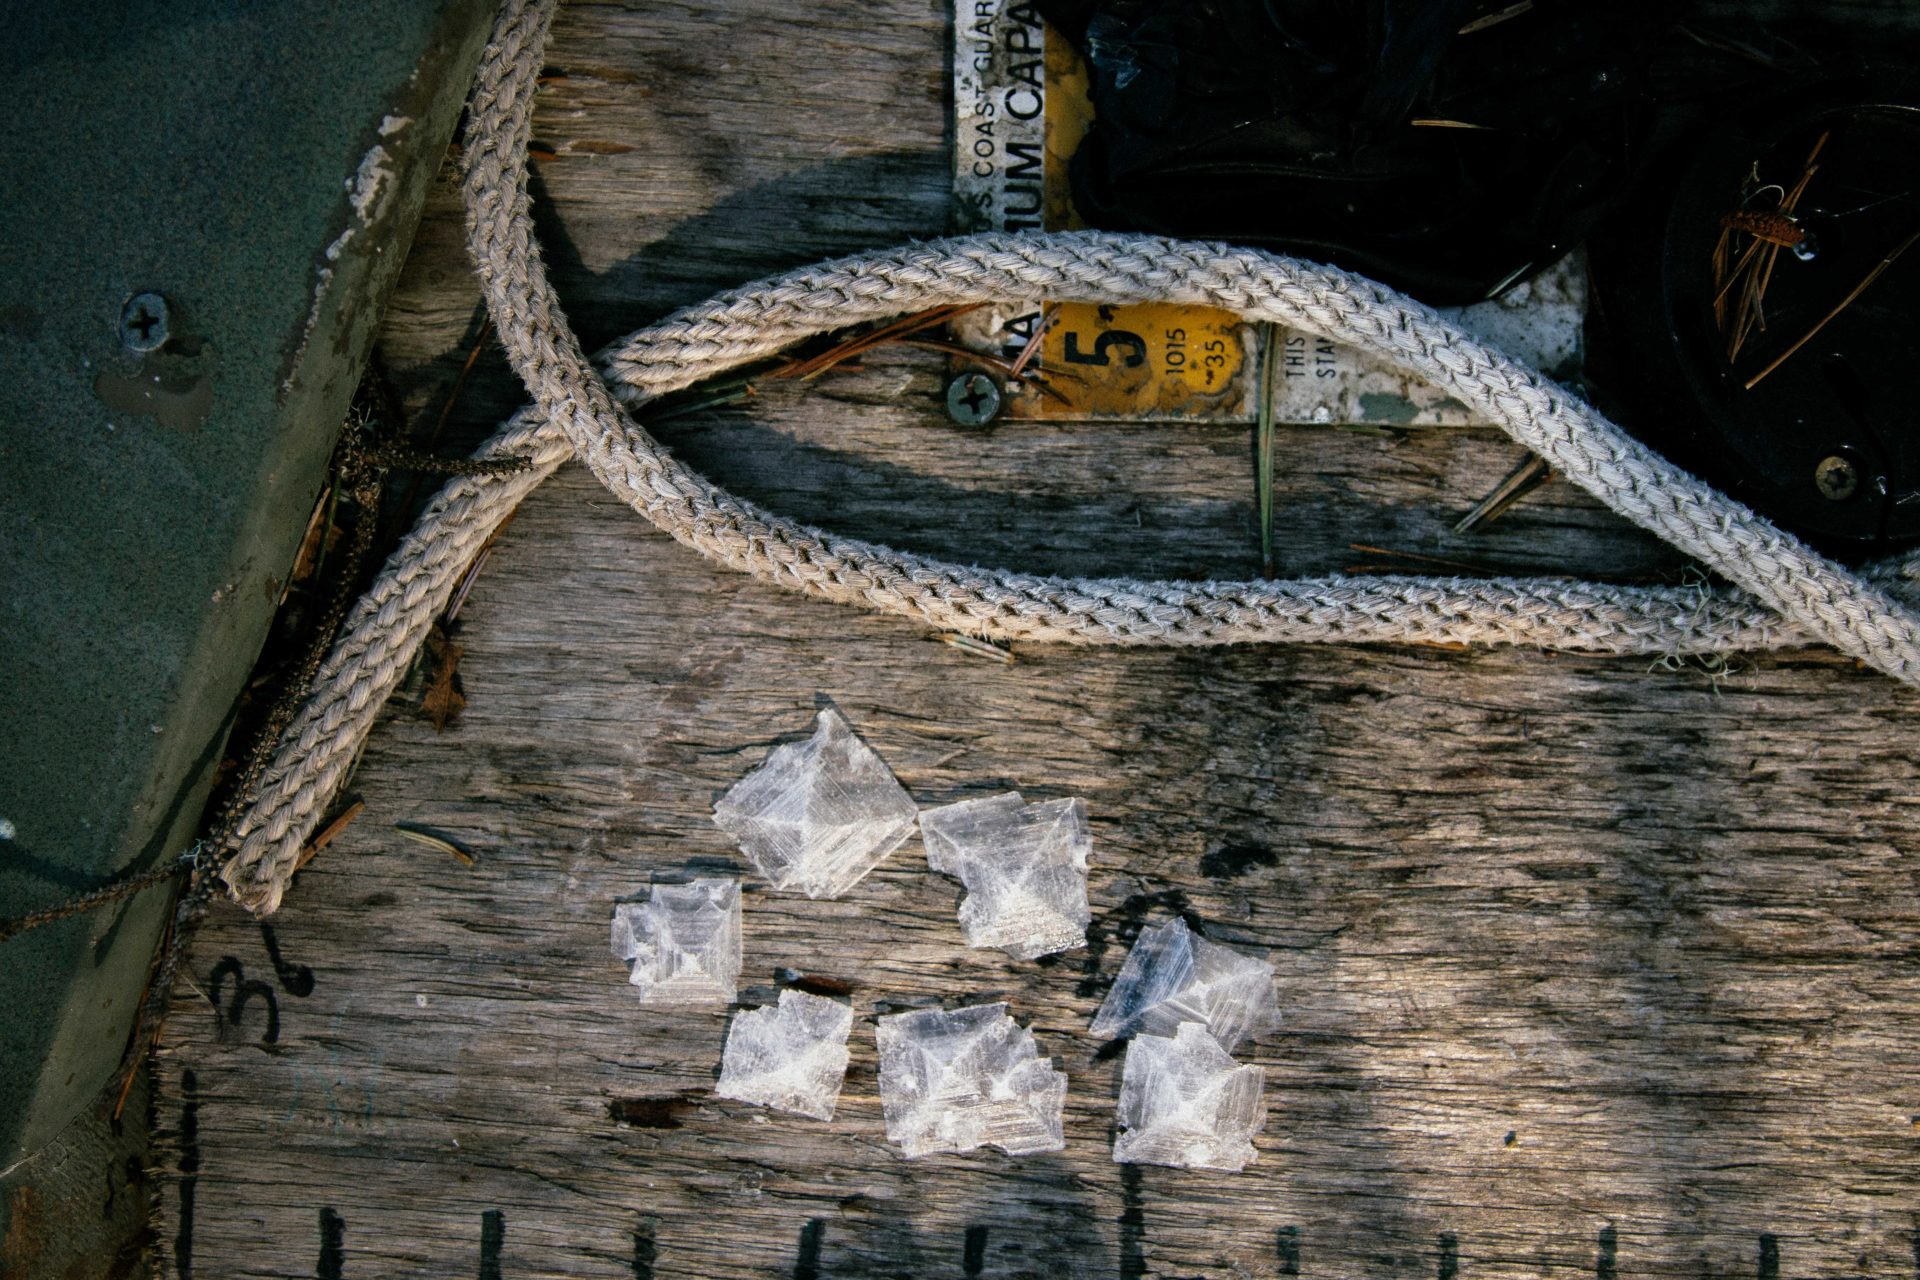 Paper like slices of salt lay on the deck of a boat, just below a rope.